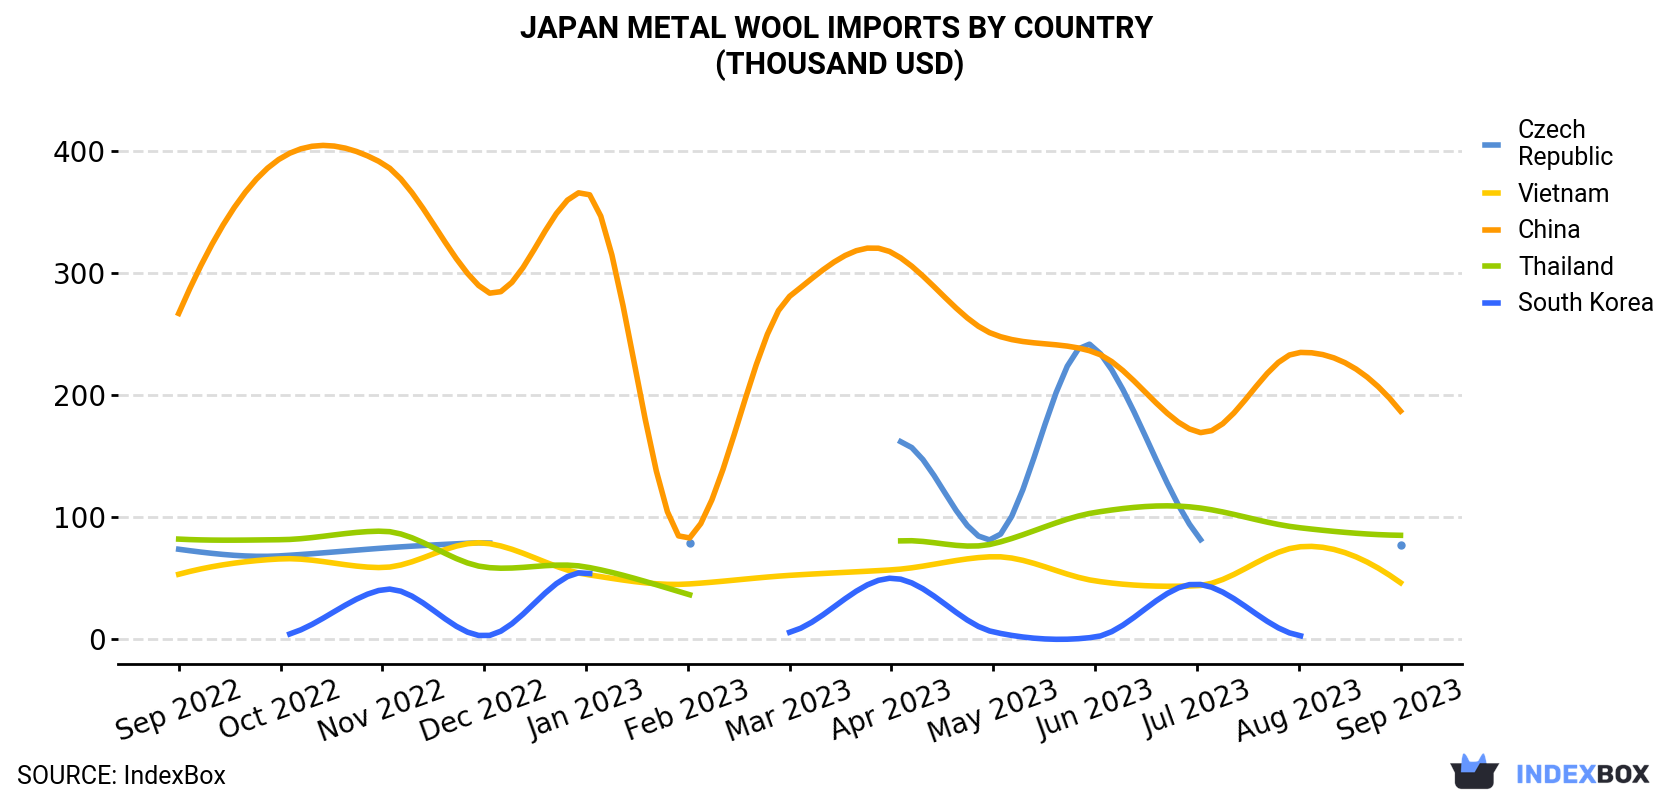 Japan Metal Wool Imports By Country (Thousand USD)